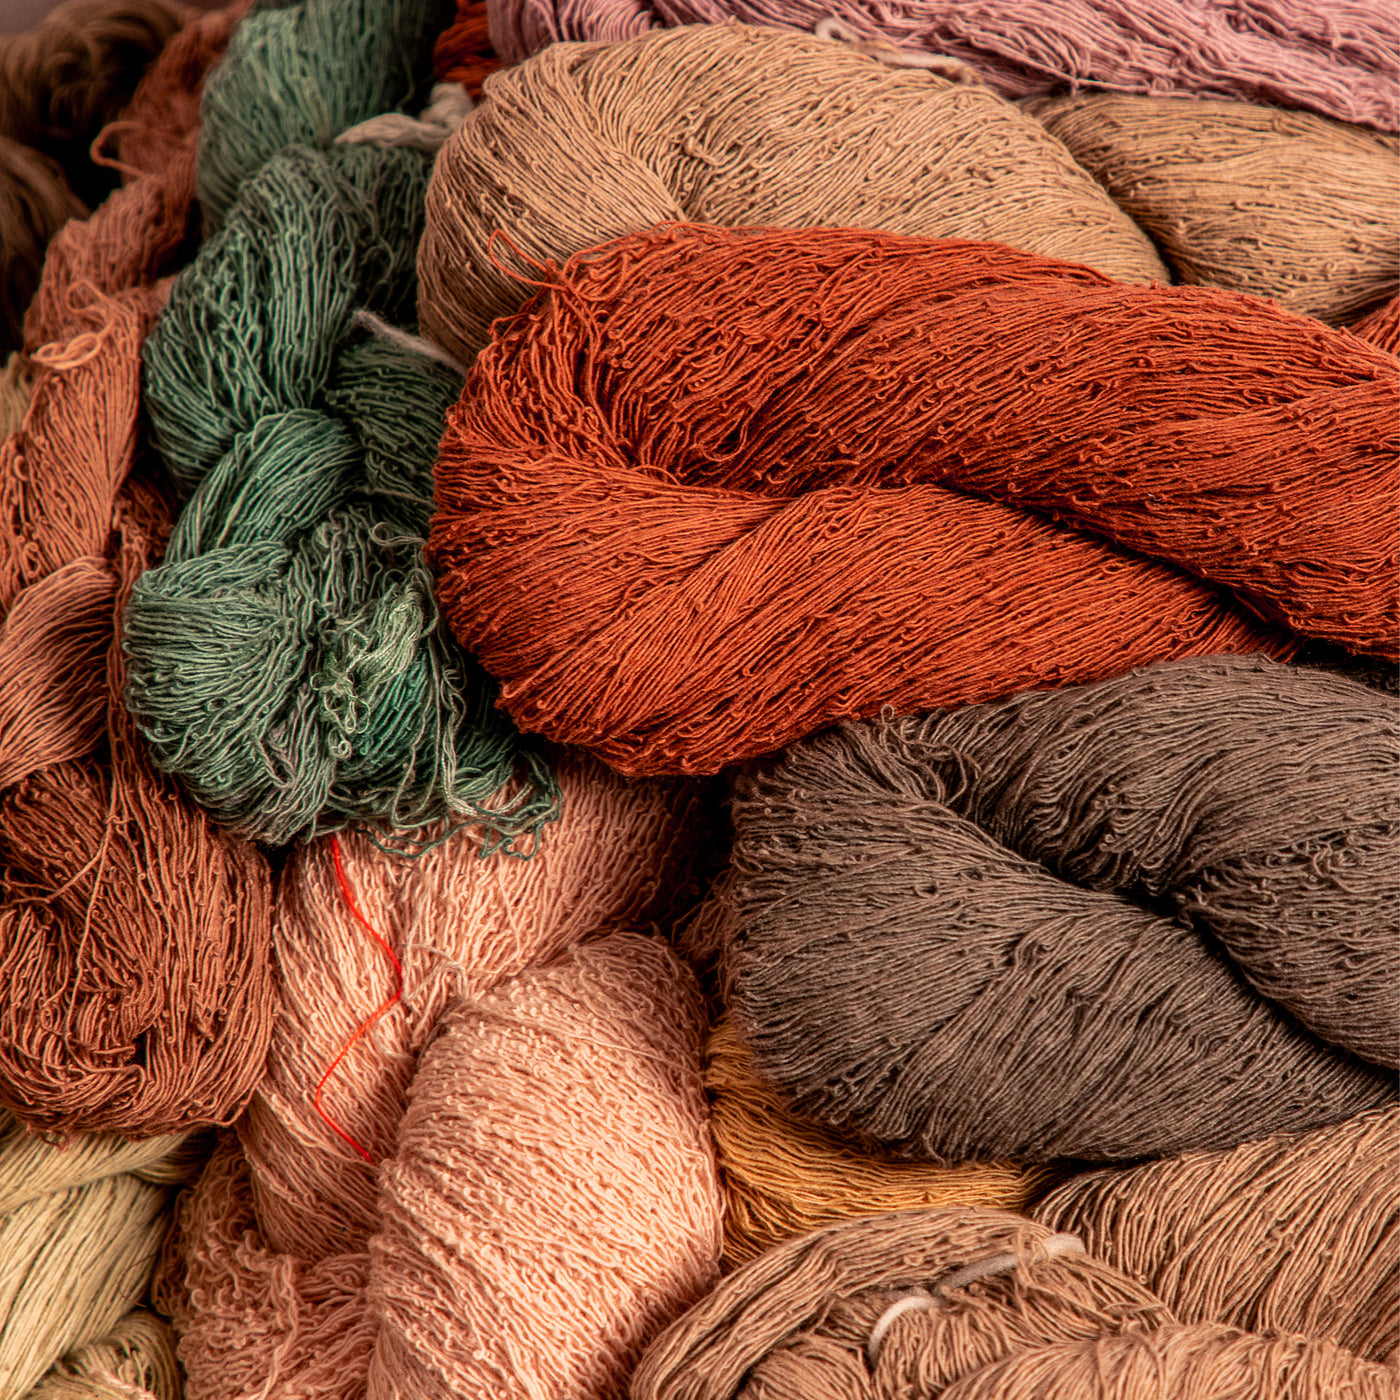 Image of various colors of naturally-dyed yarn